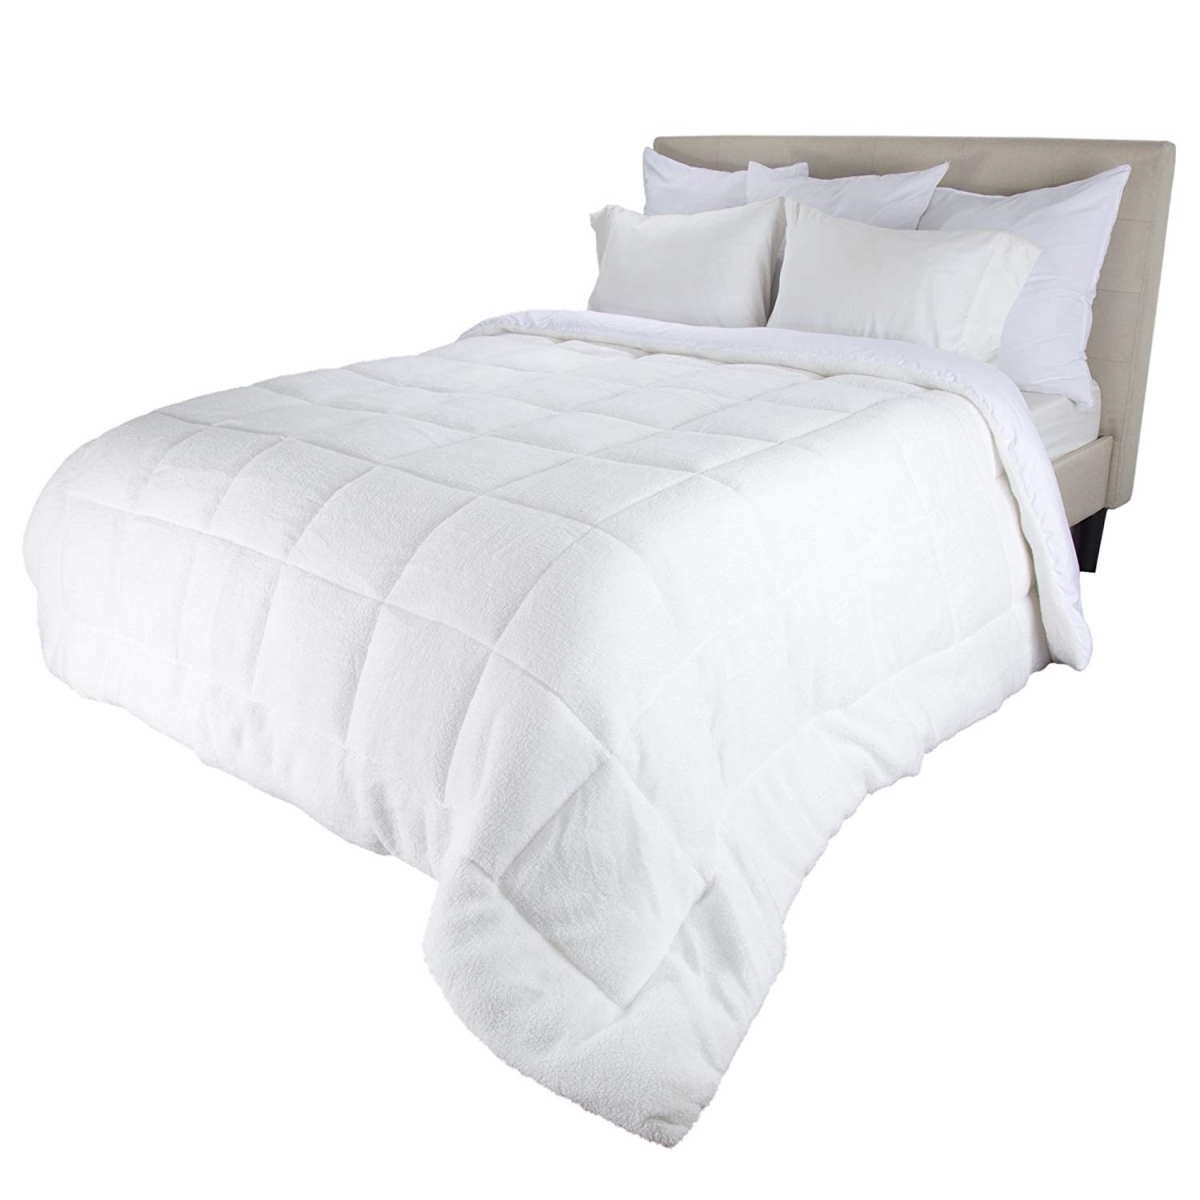 64a-03953 Reversible Oversized Down Alt Comforter With Sherpa, Twin Size